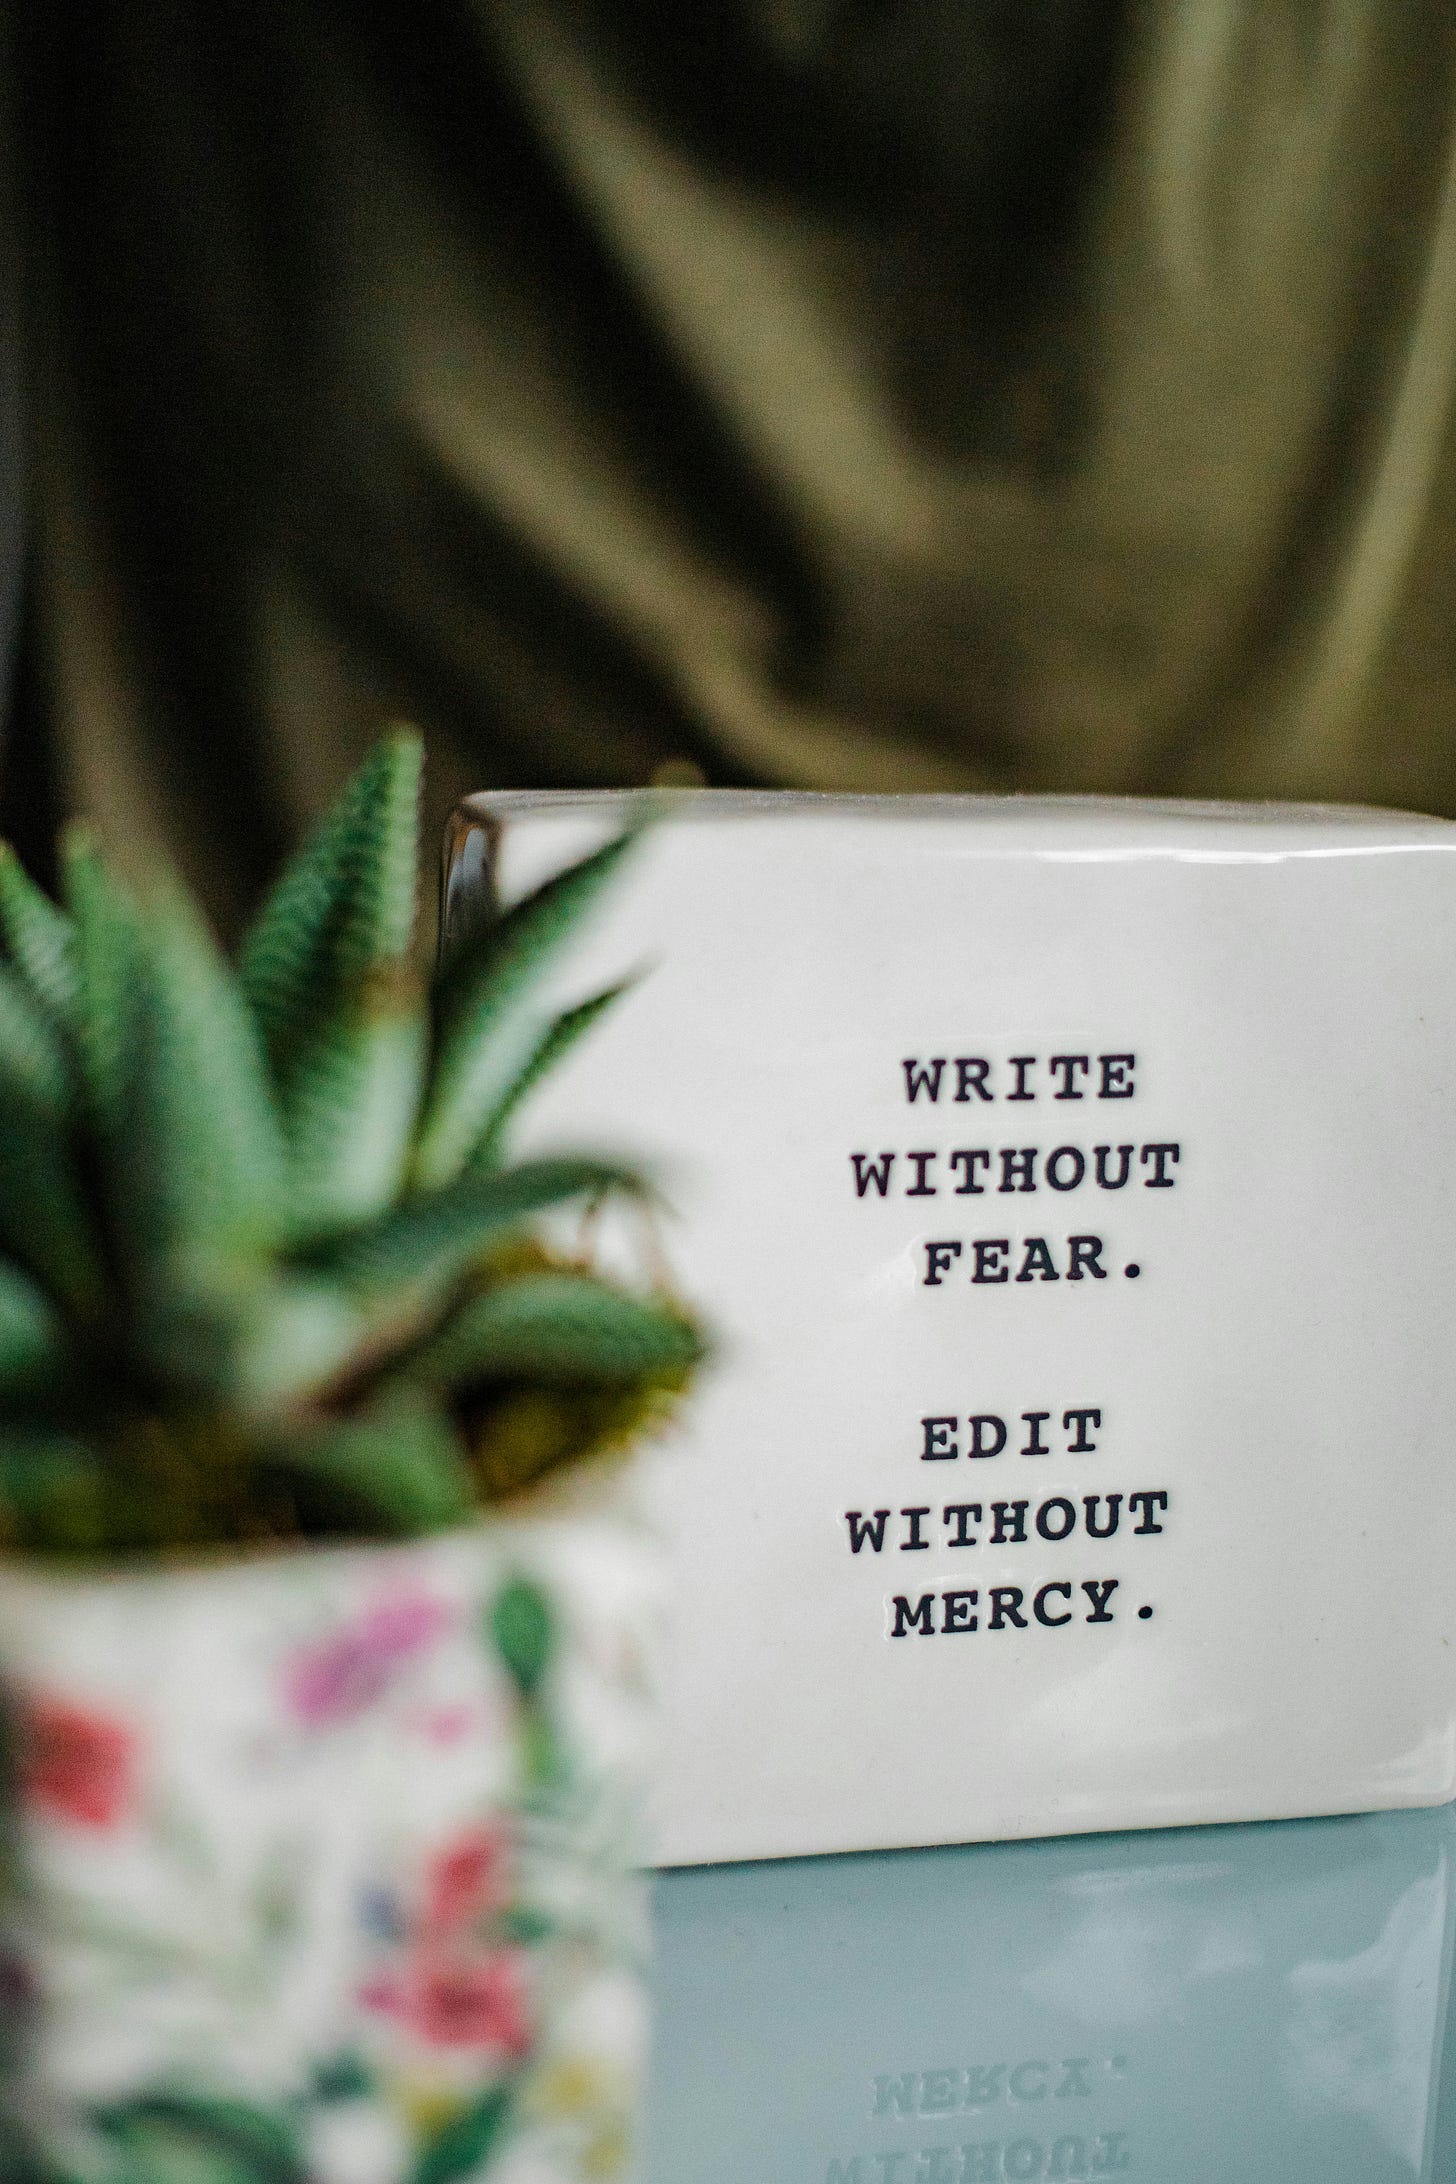 photo of a sign saying: Write without fear. Edit without mercy.